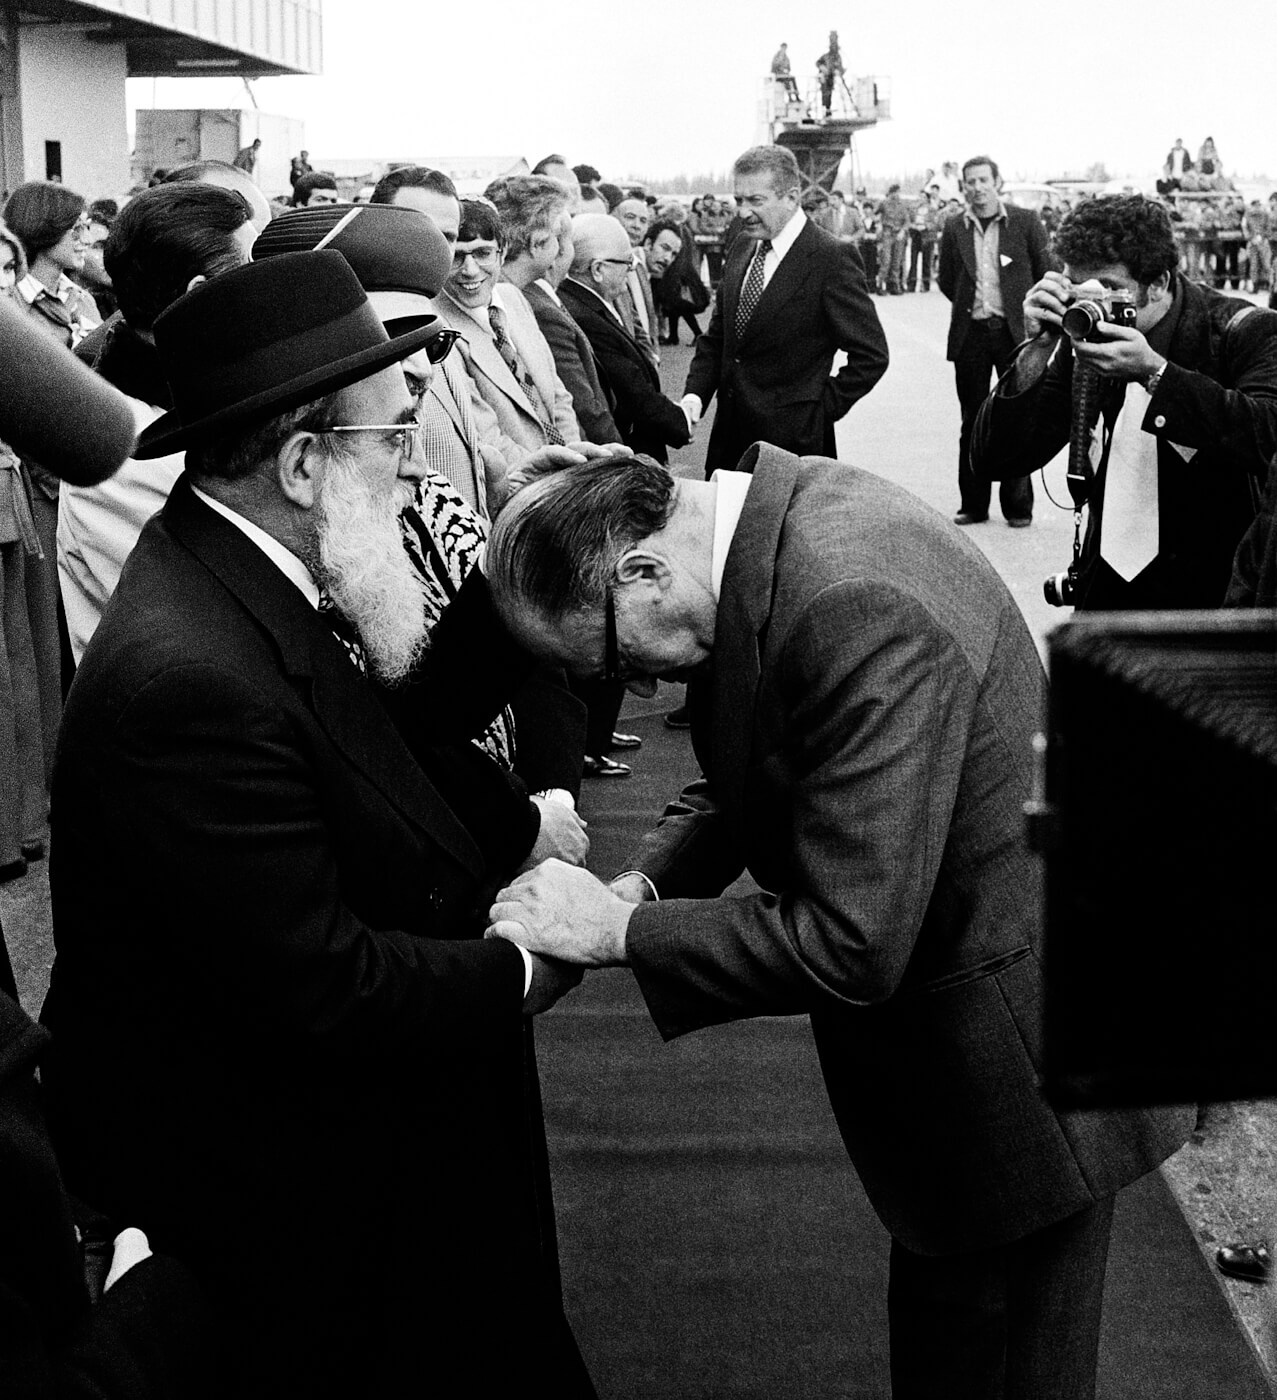 Begin, right, bows his head to receive a blessing from Shlomo Goren in 1977 at Ben-Gurion Airport. Max Nash | AP